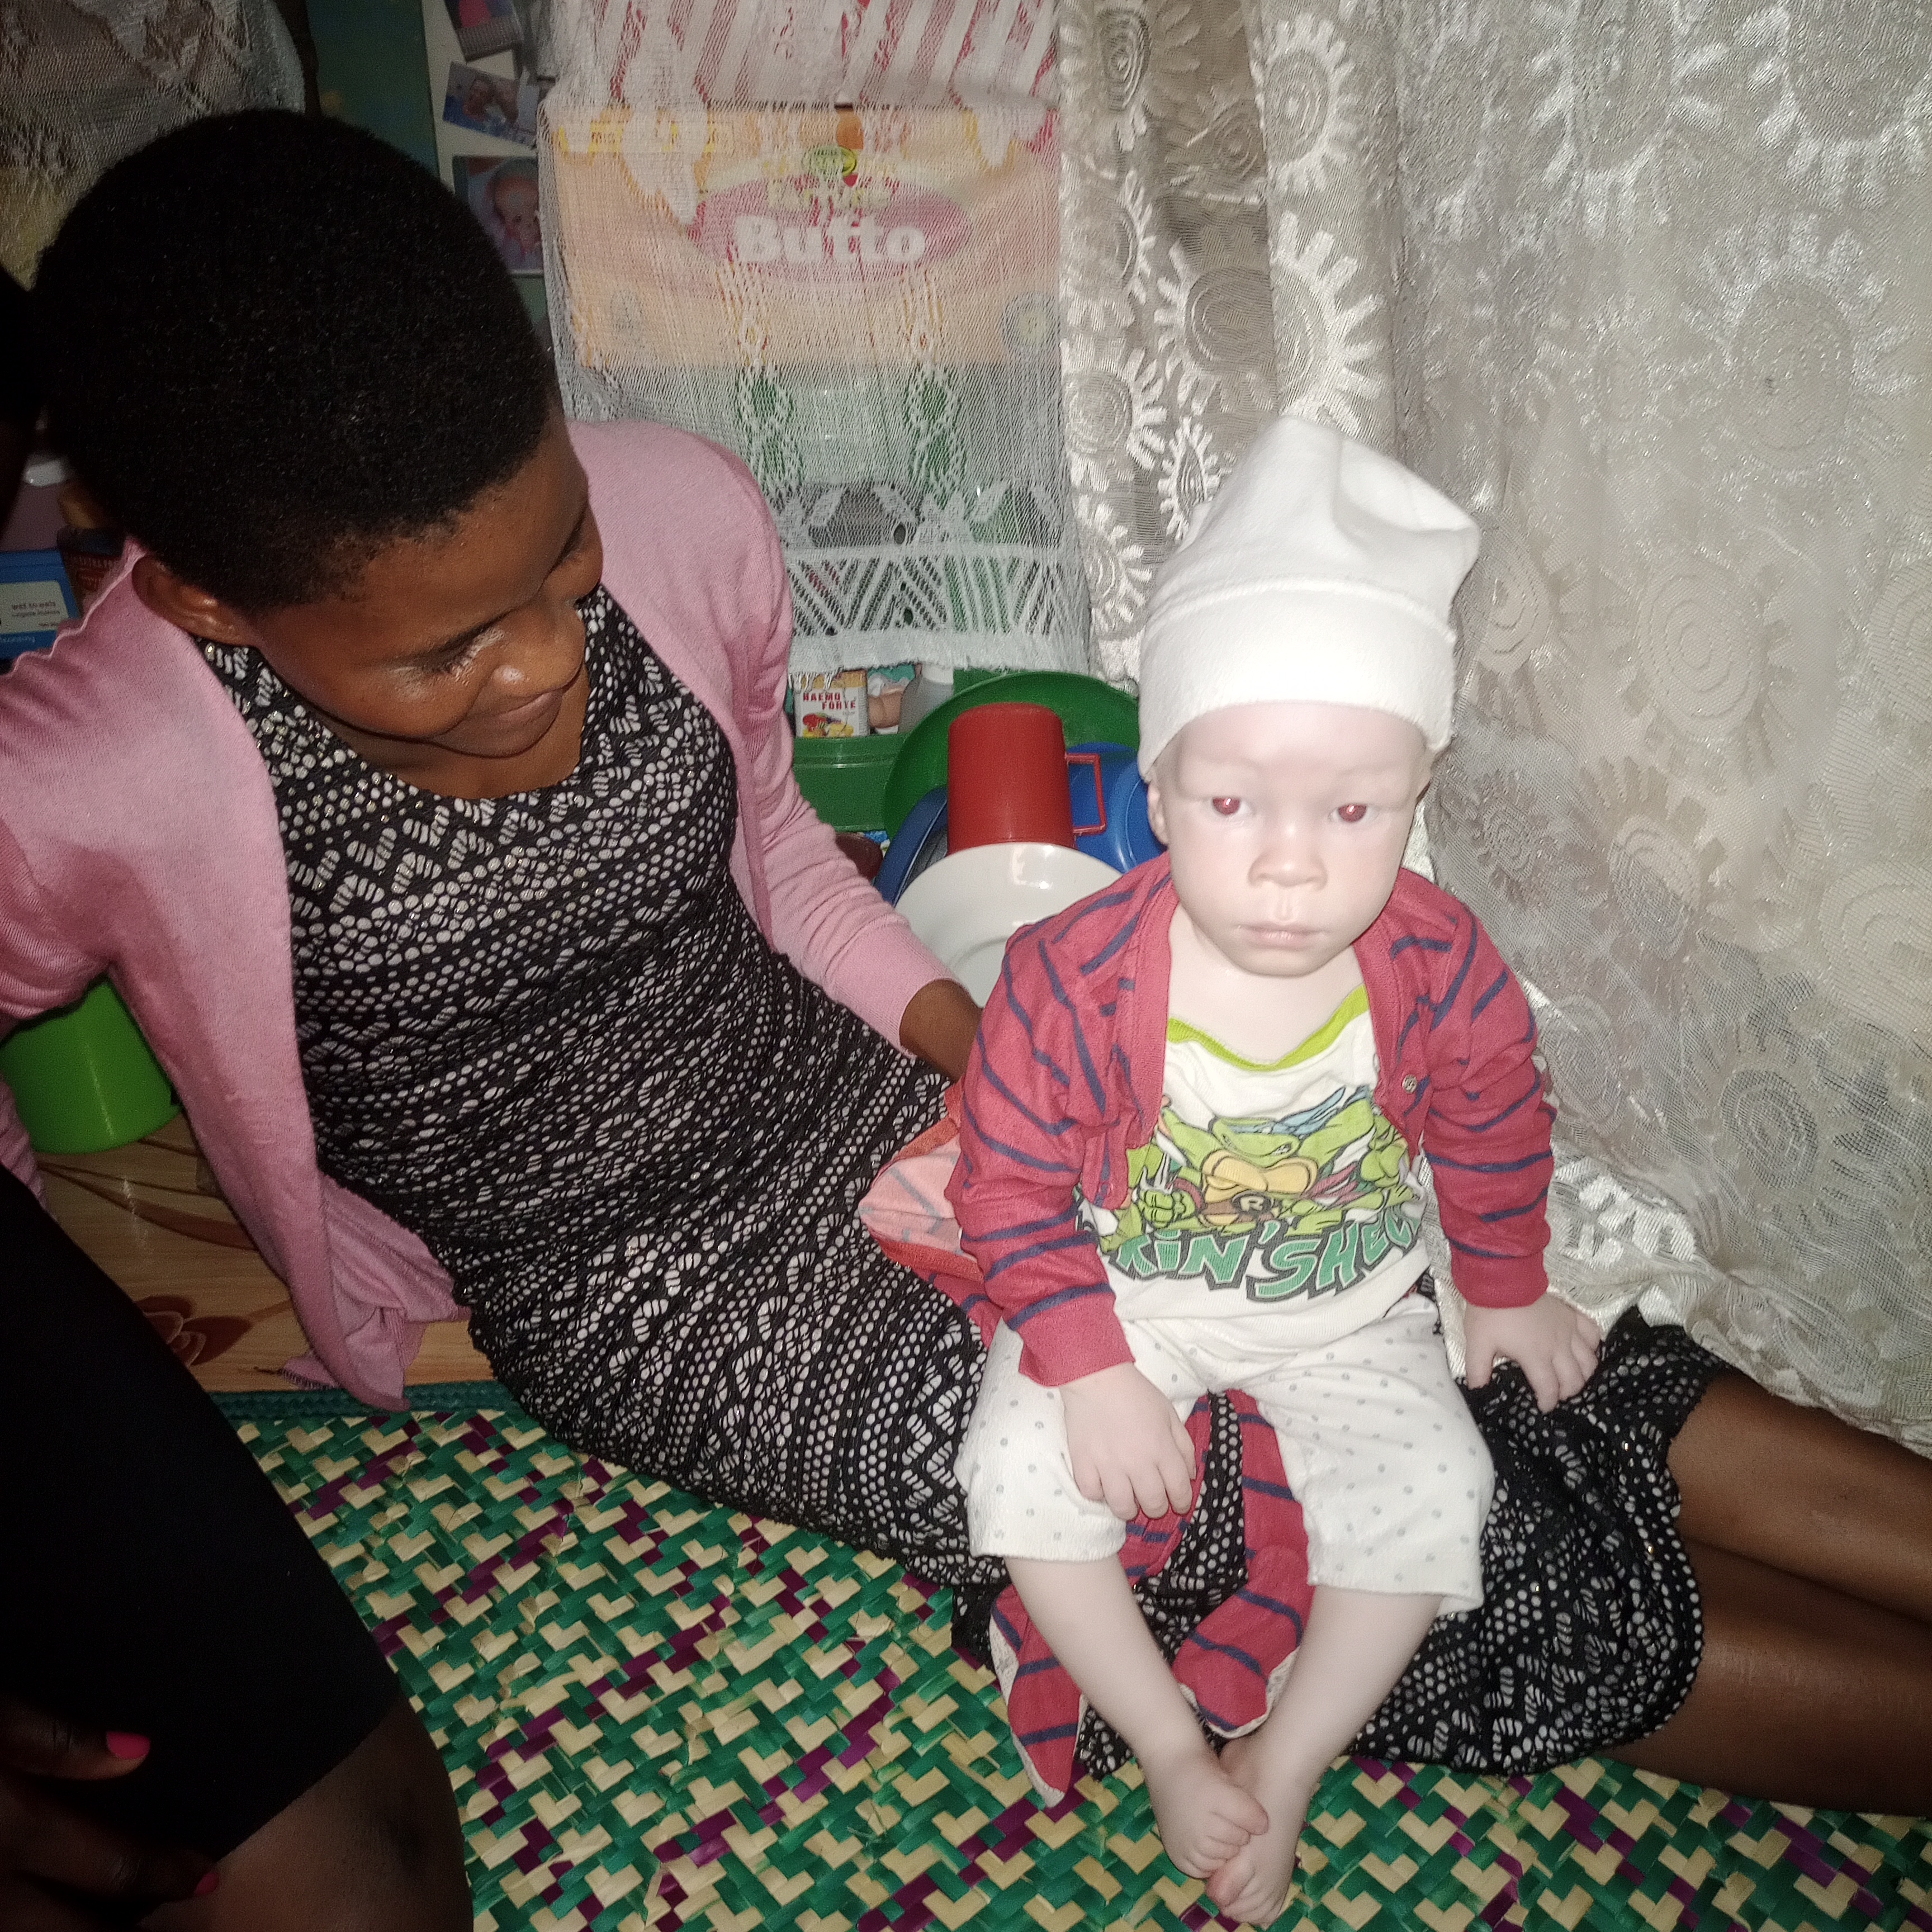 We have our little boy aged 1year & 10 months called Franc. He was abandoned by his father after birth on knowing he was born with a condition of Albinism. Sandra the mother survive on mercies of good Samaritans like you..